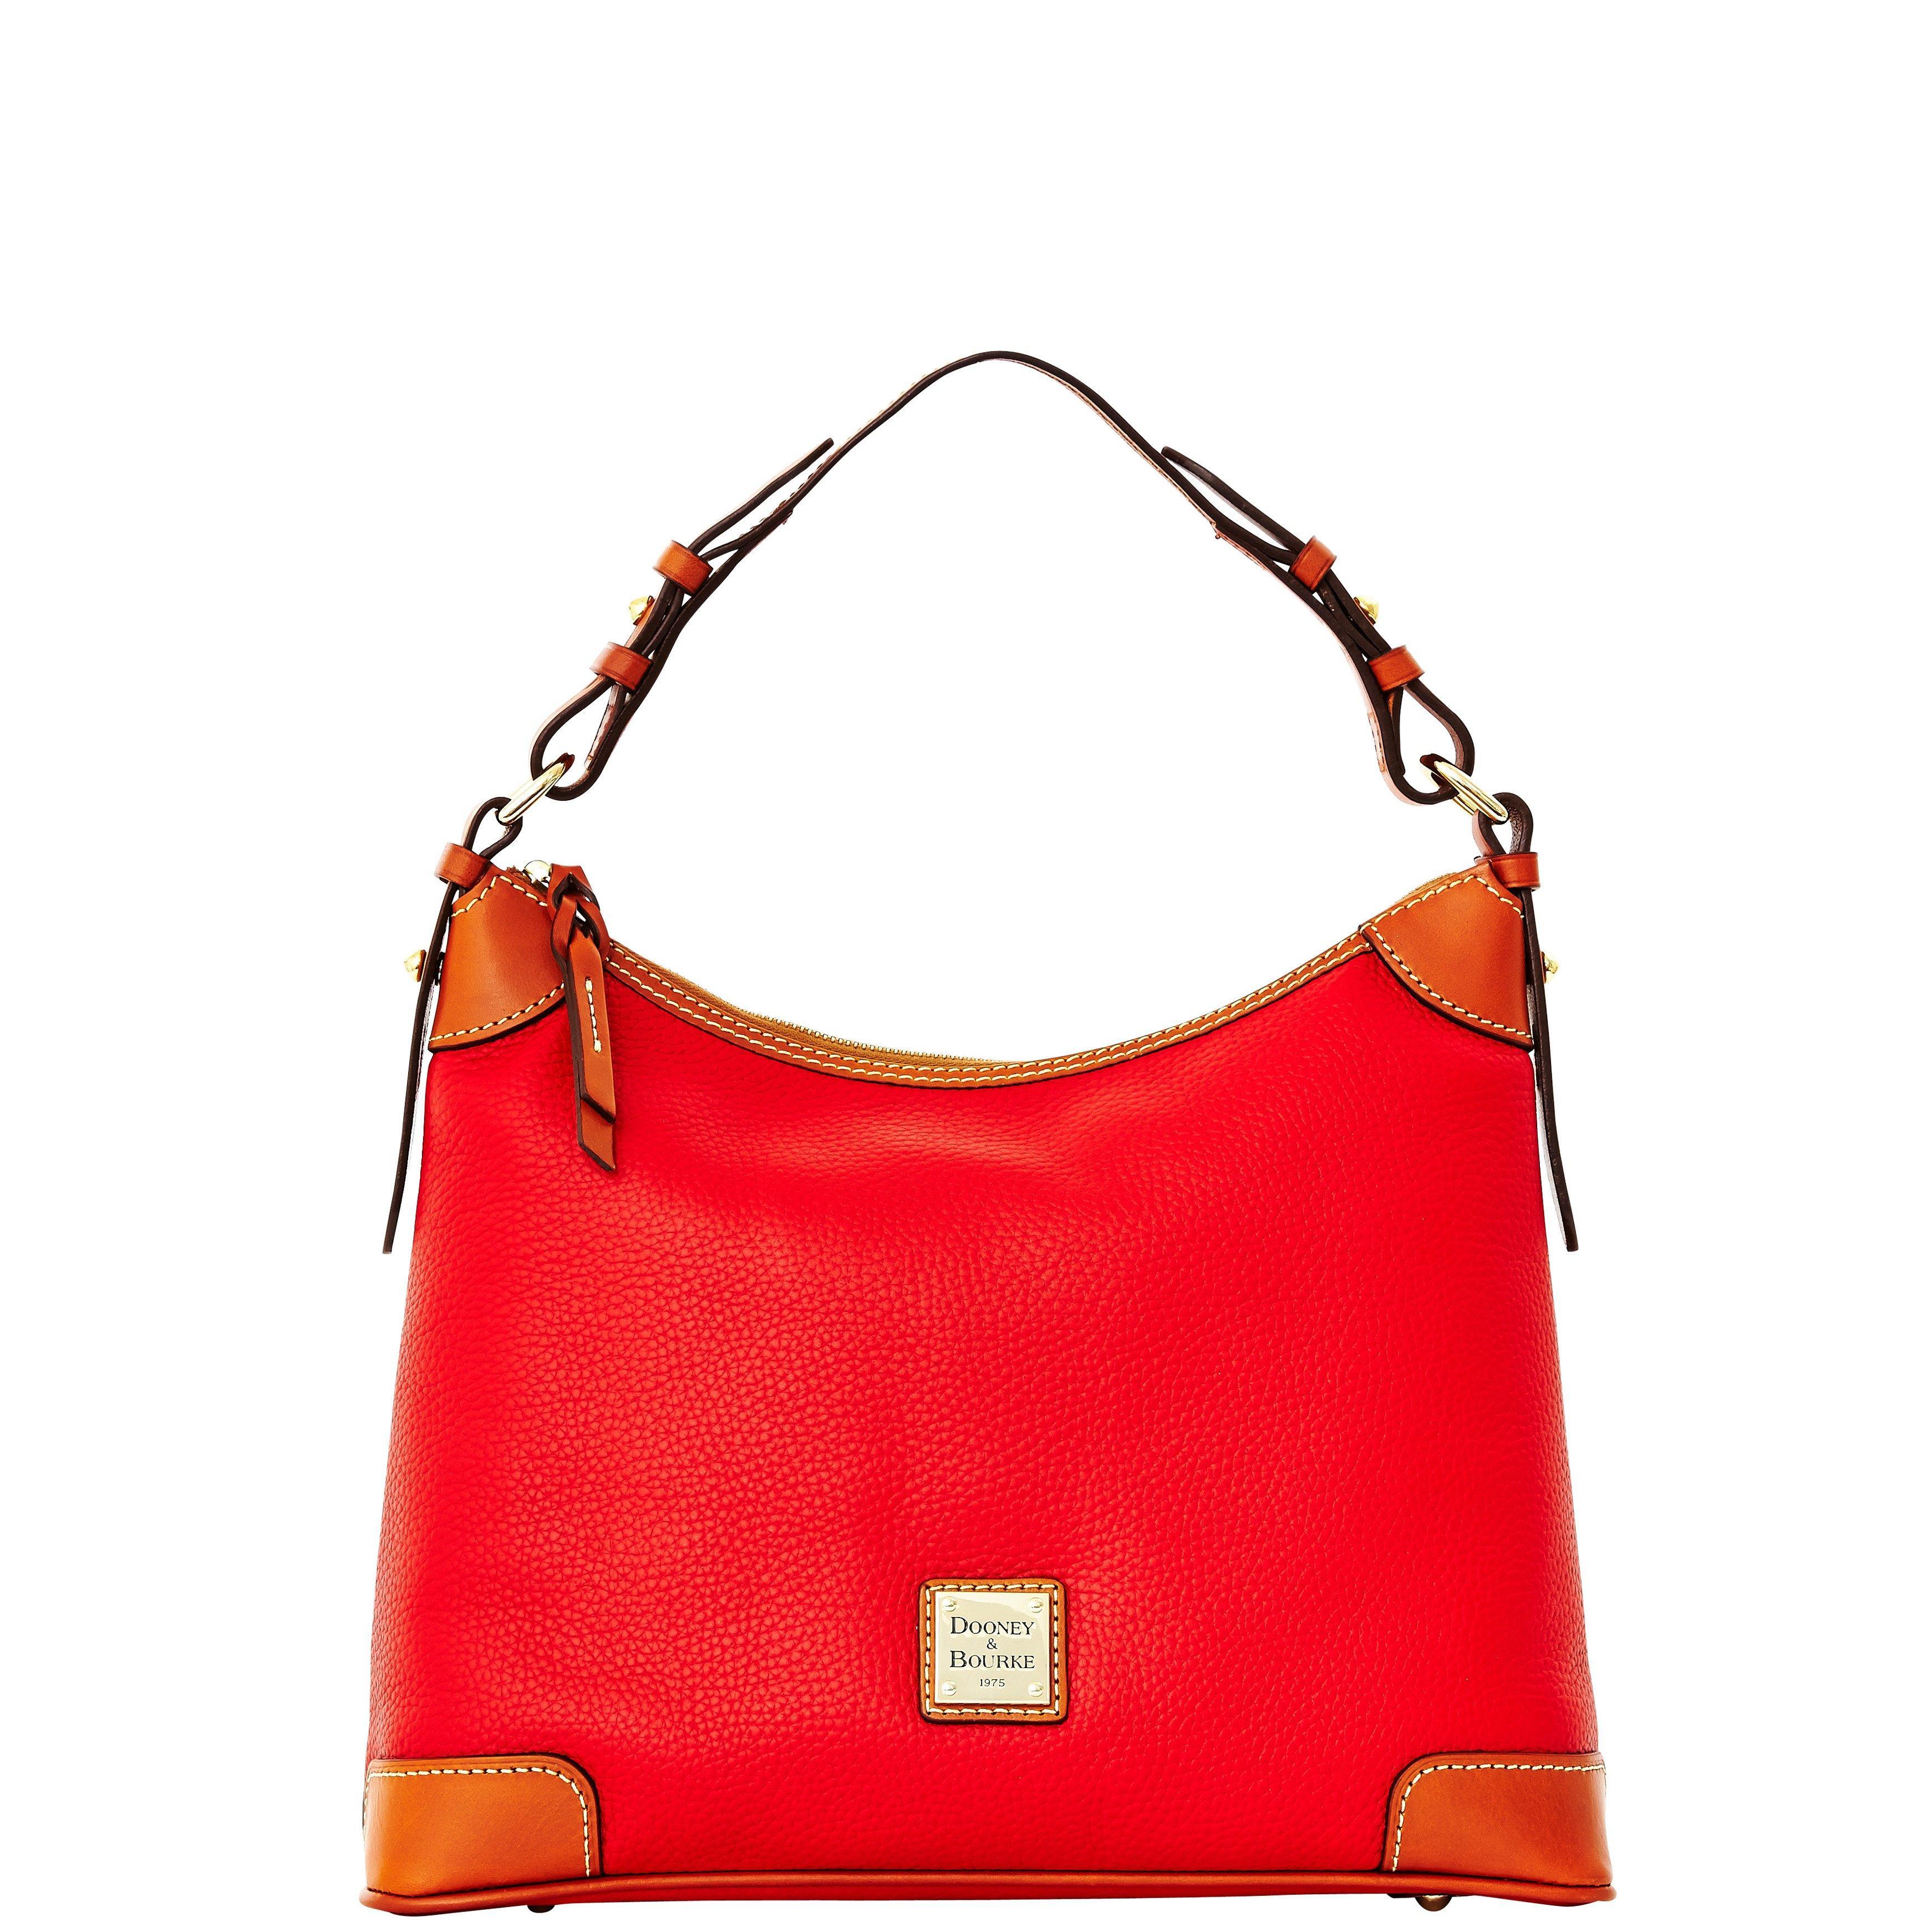 Dooney & Bourke Leather Pebble Grain Hobo in Red - Save 21% - Lyst